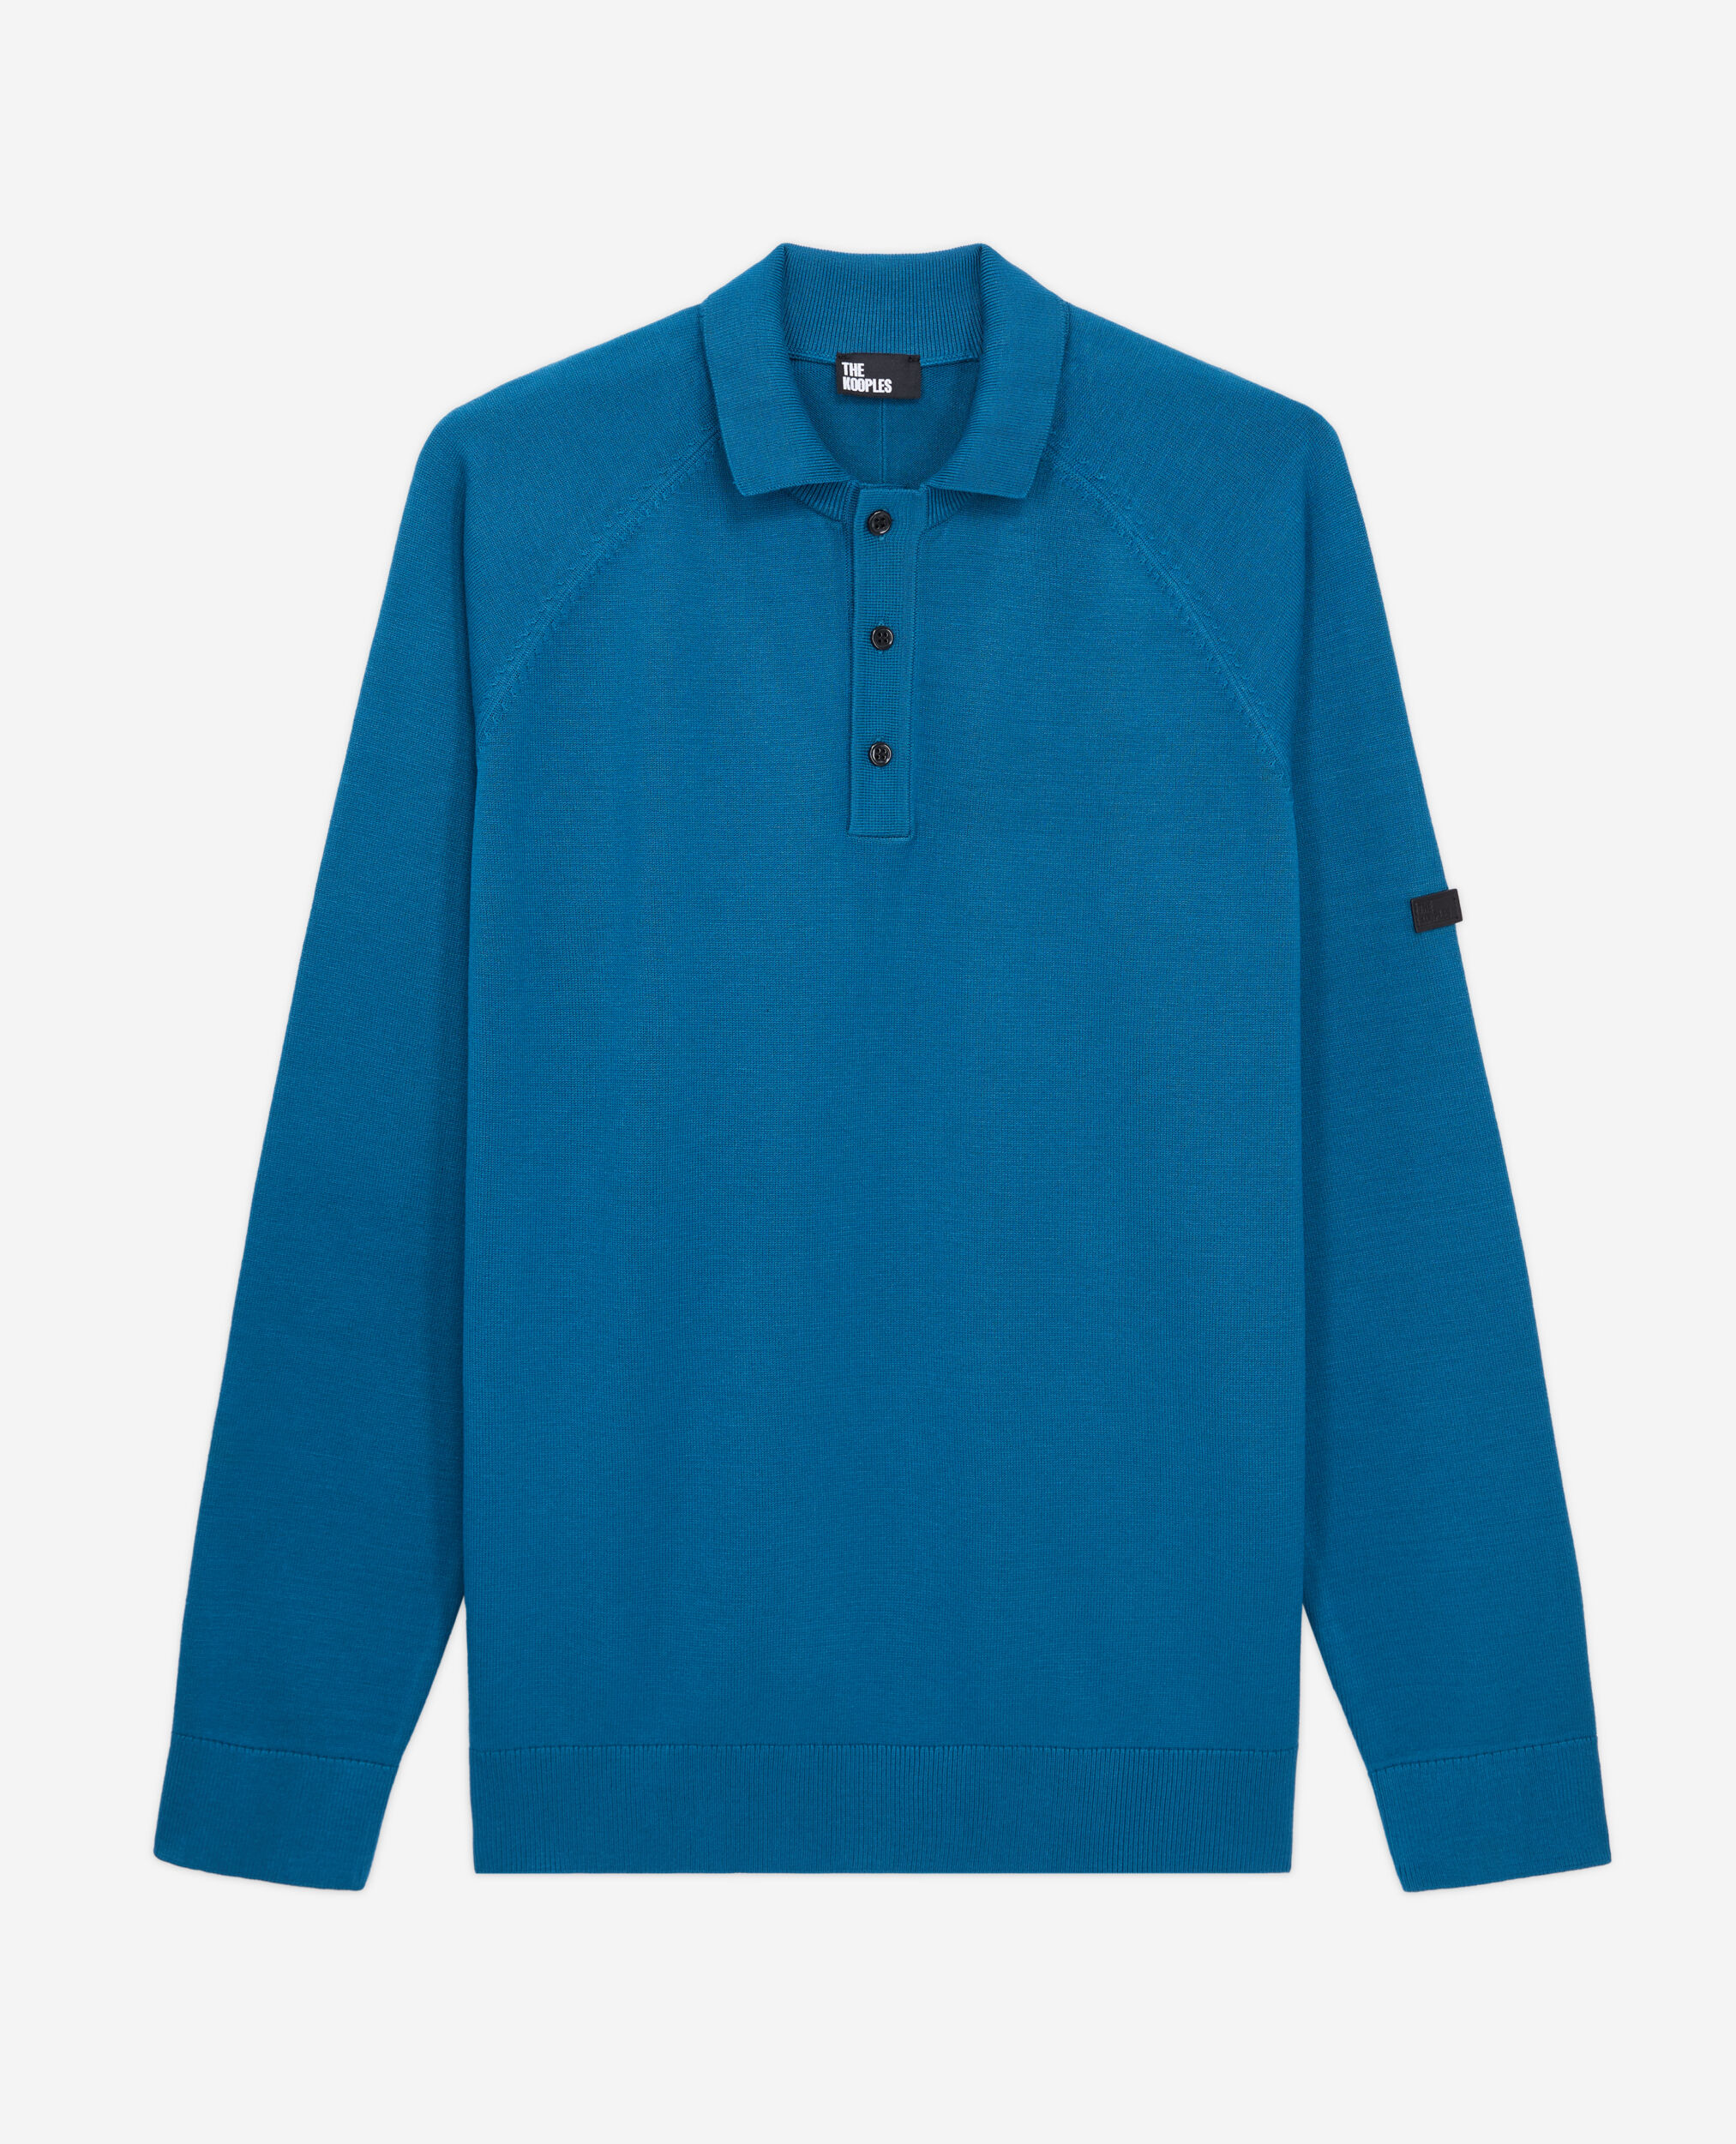 Blue knit polo t-shirt, MEDIUM BLUE, hi-res image number null